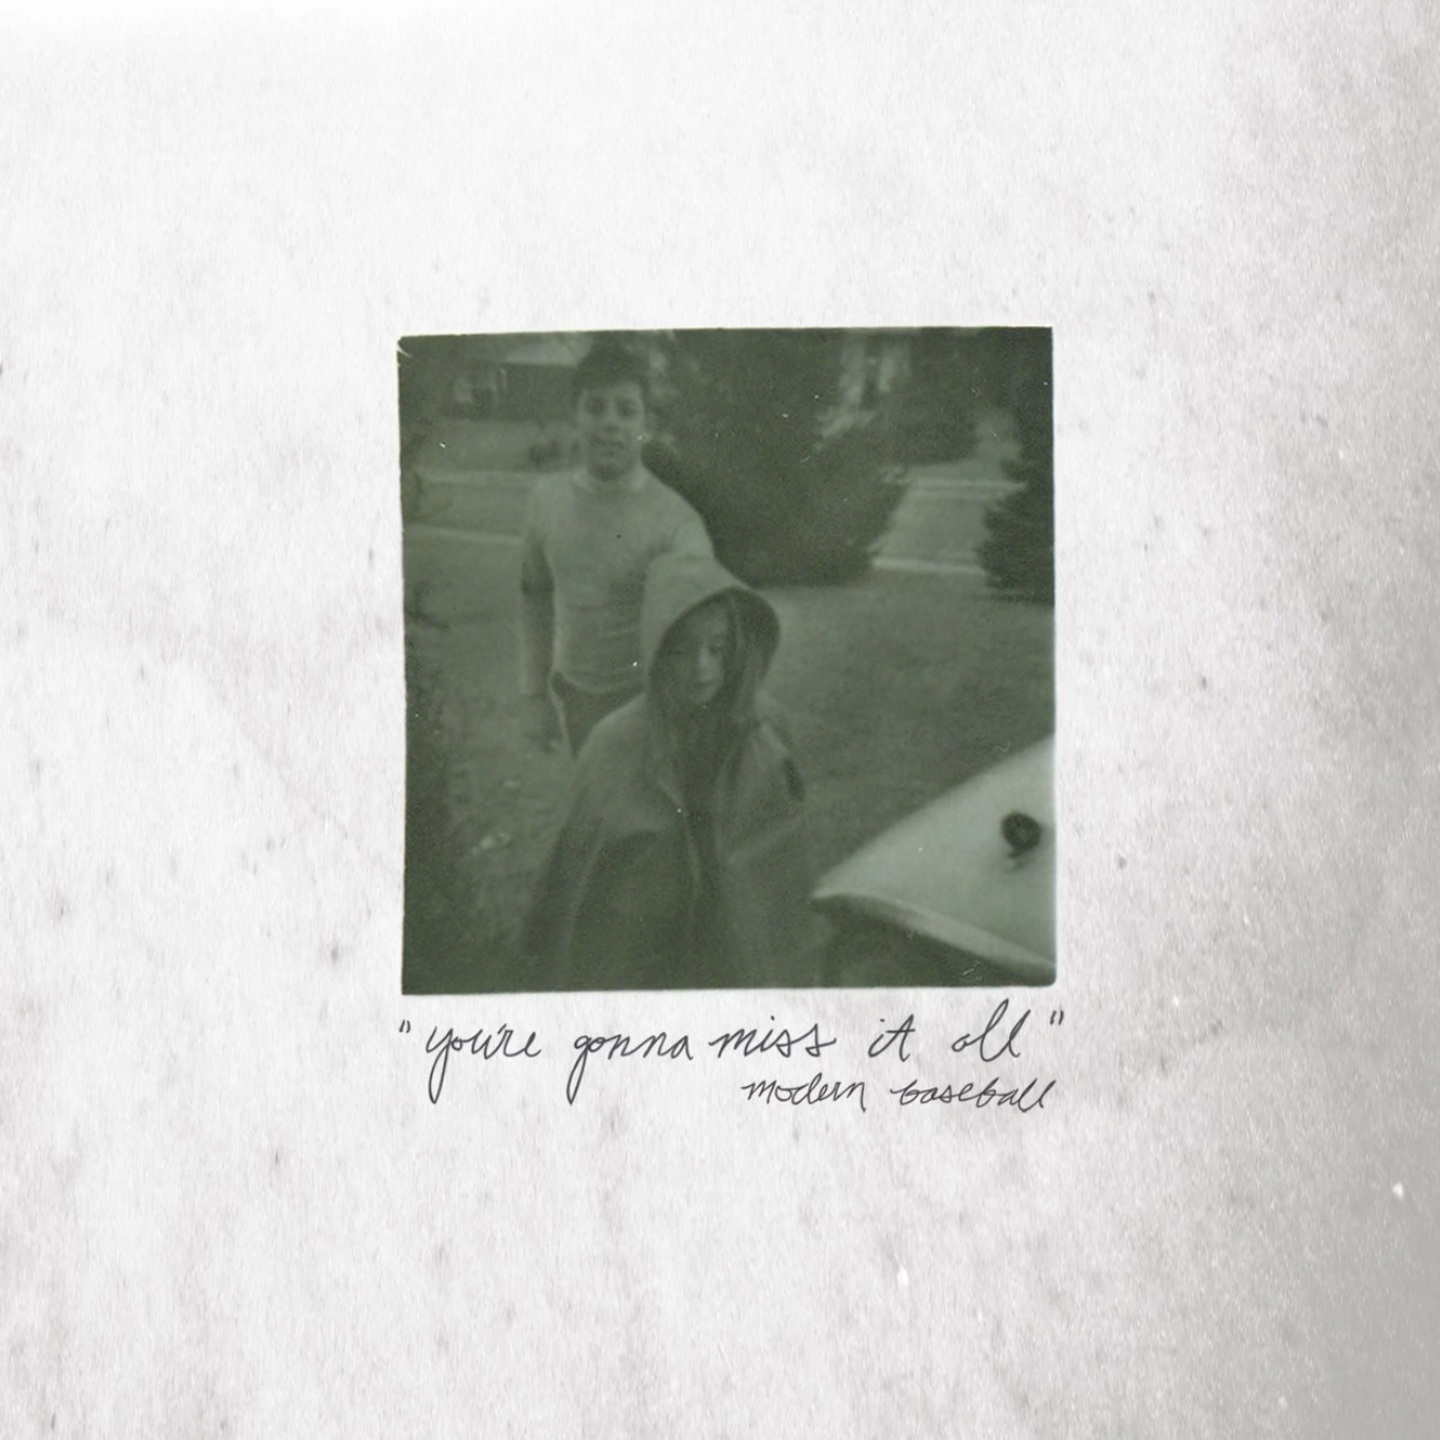 MODERN BASEBALL - Youre Gonna Miss It All LP